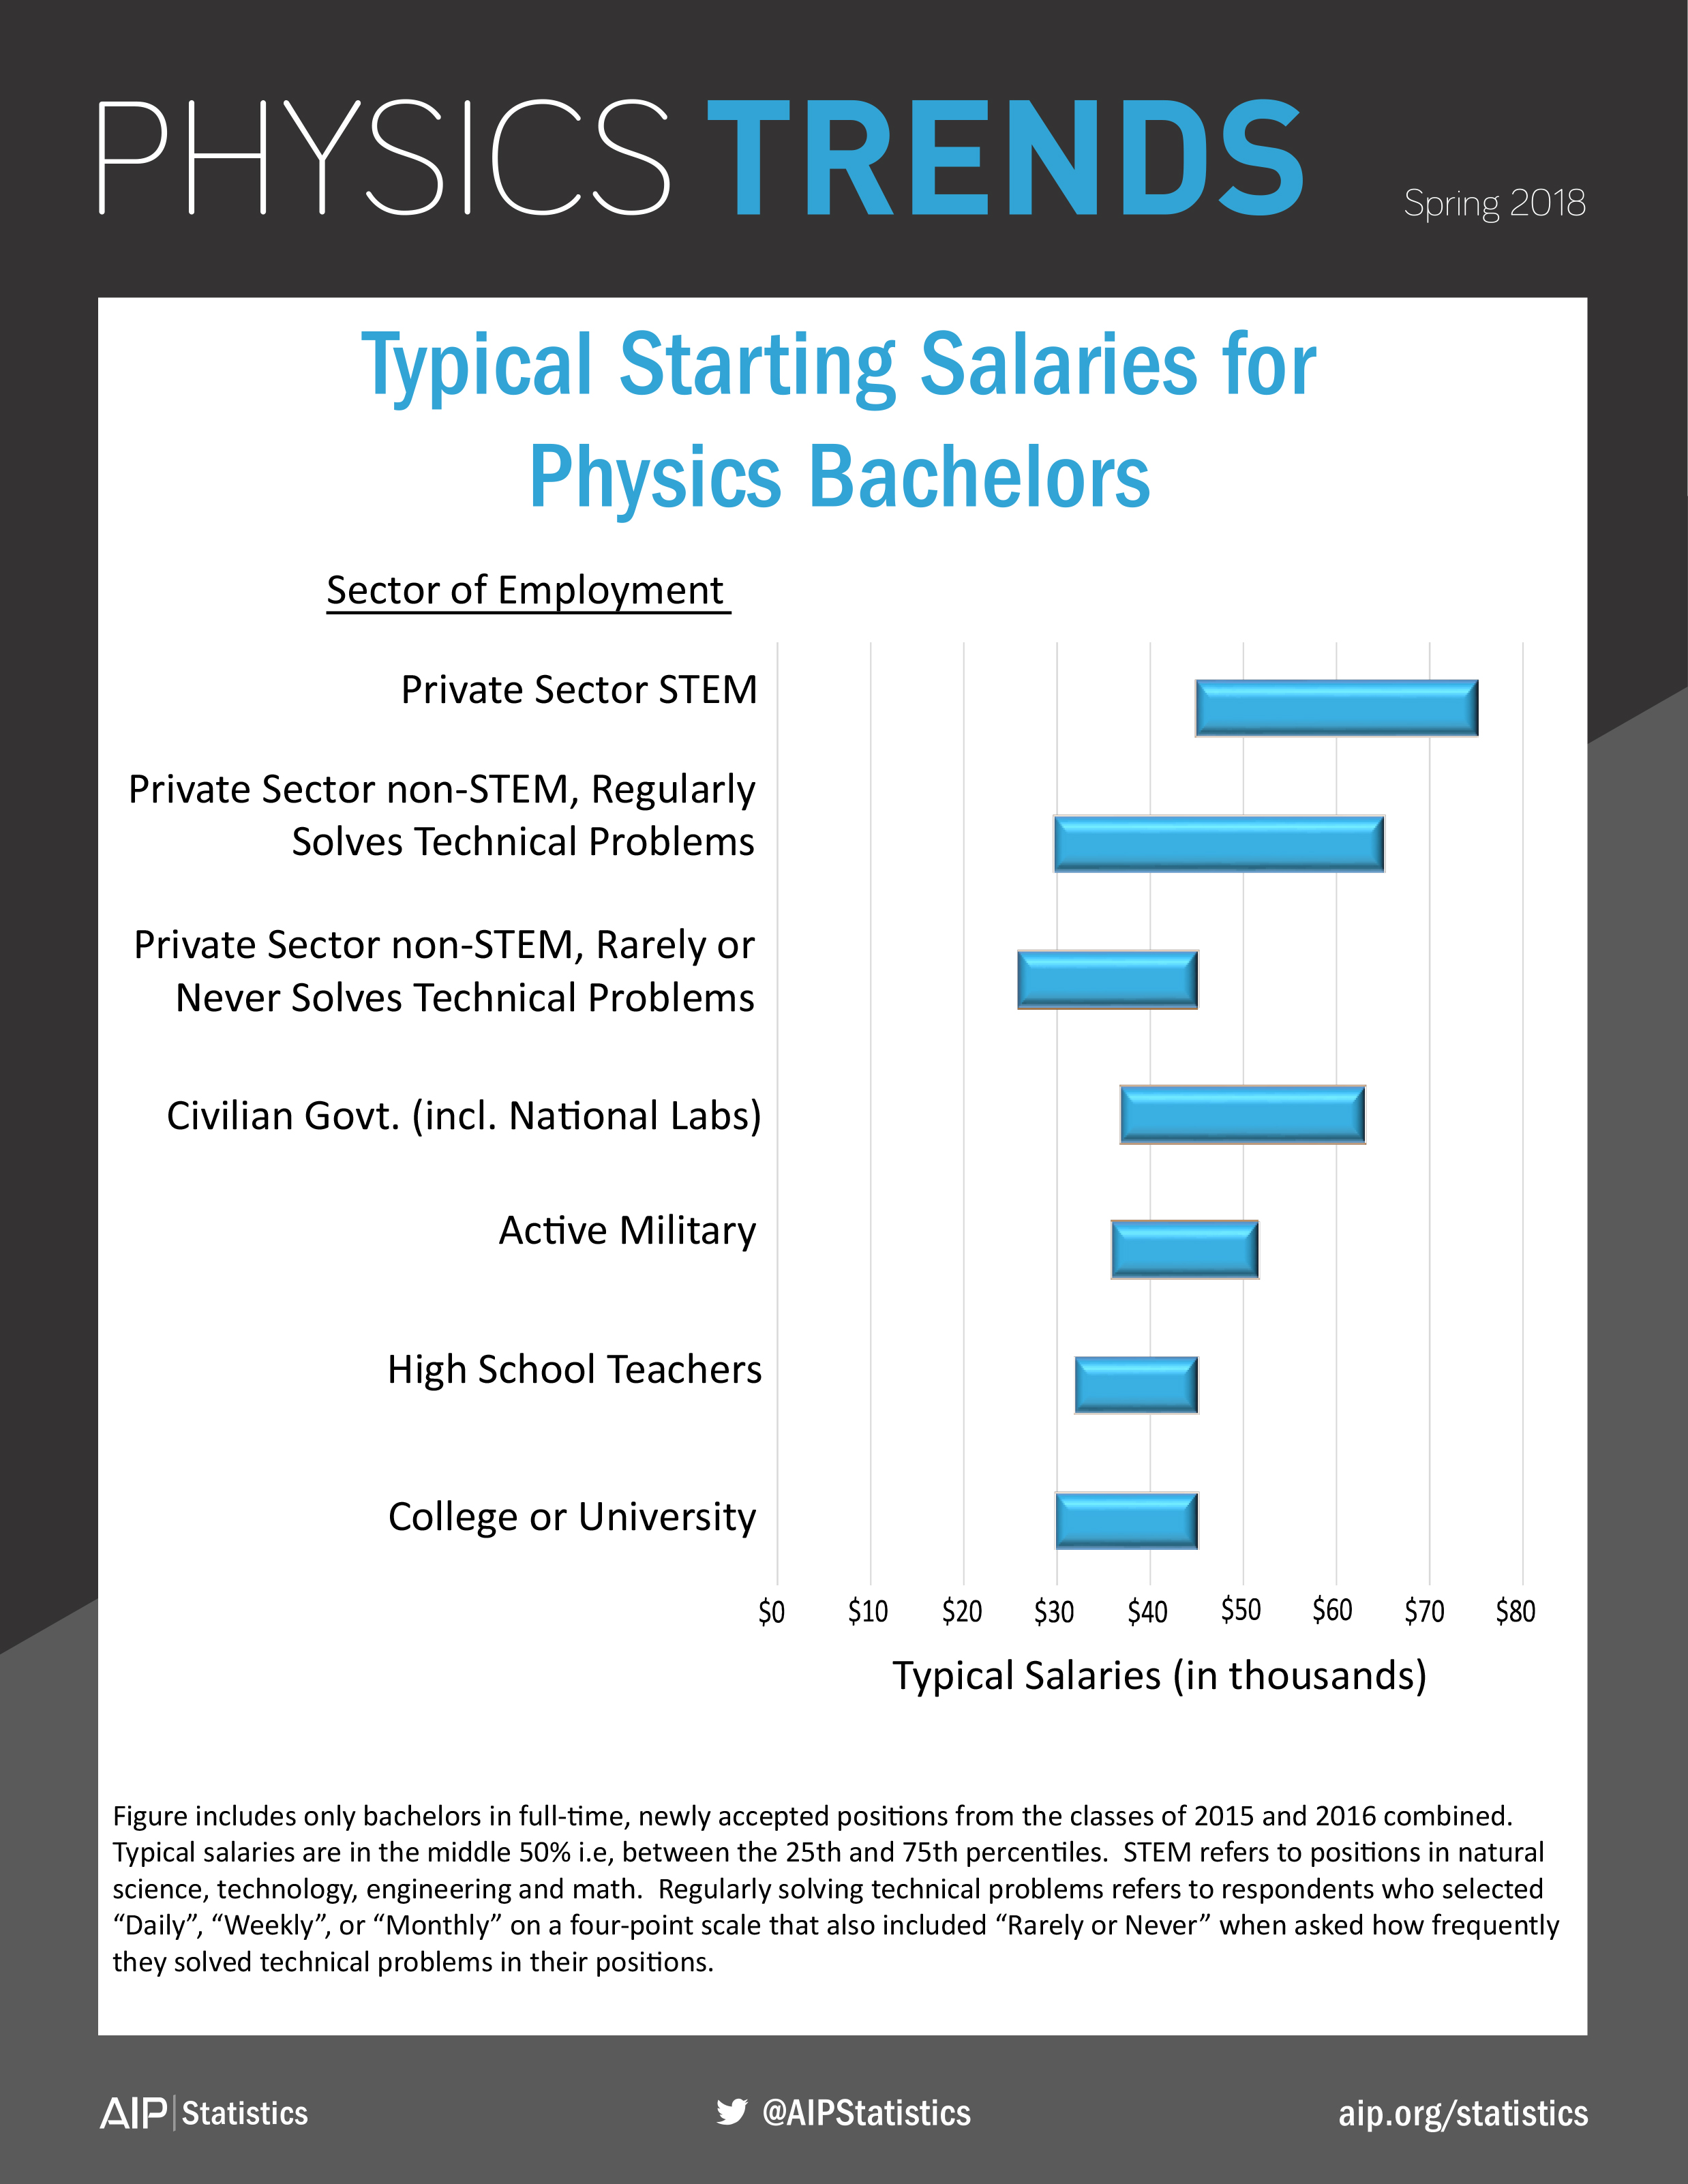 Typical Starting Salaries for Physics Bachelors